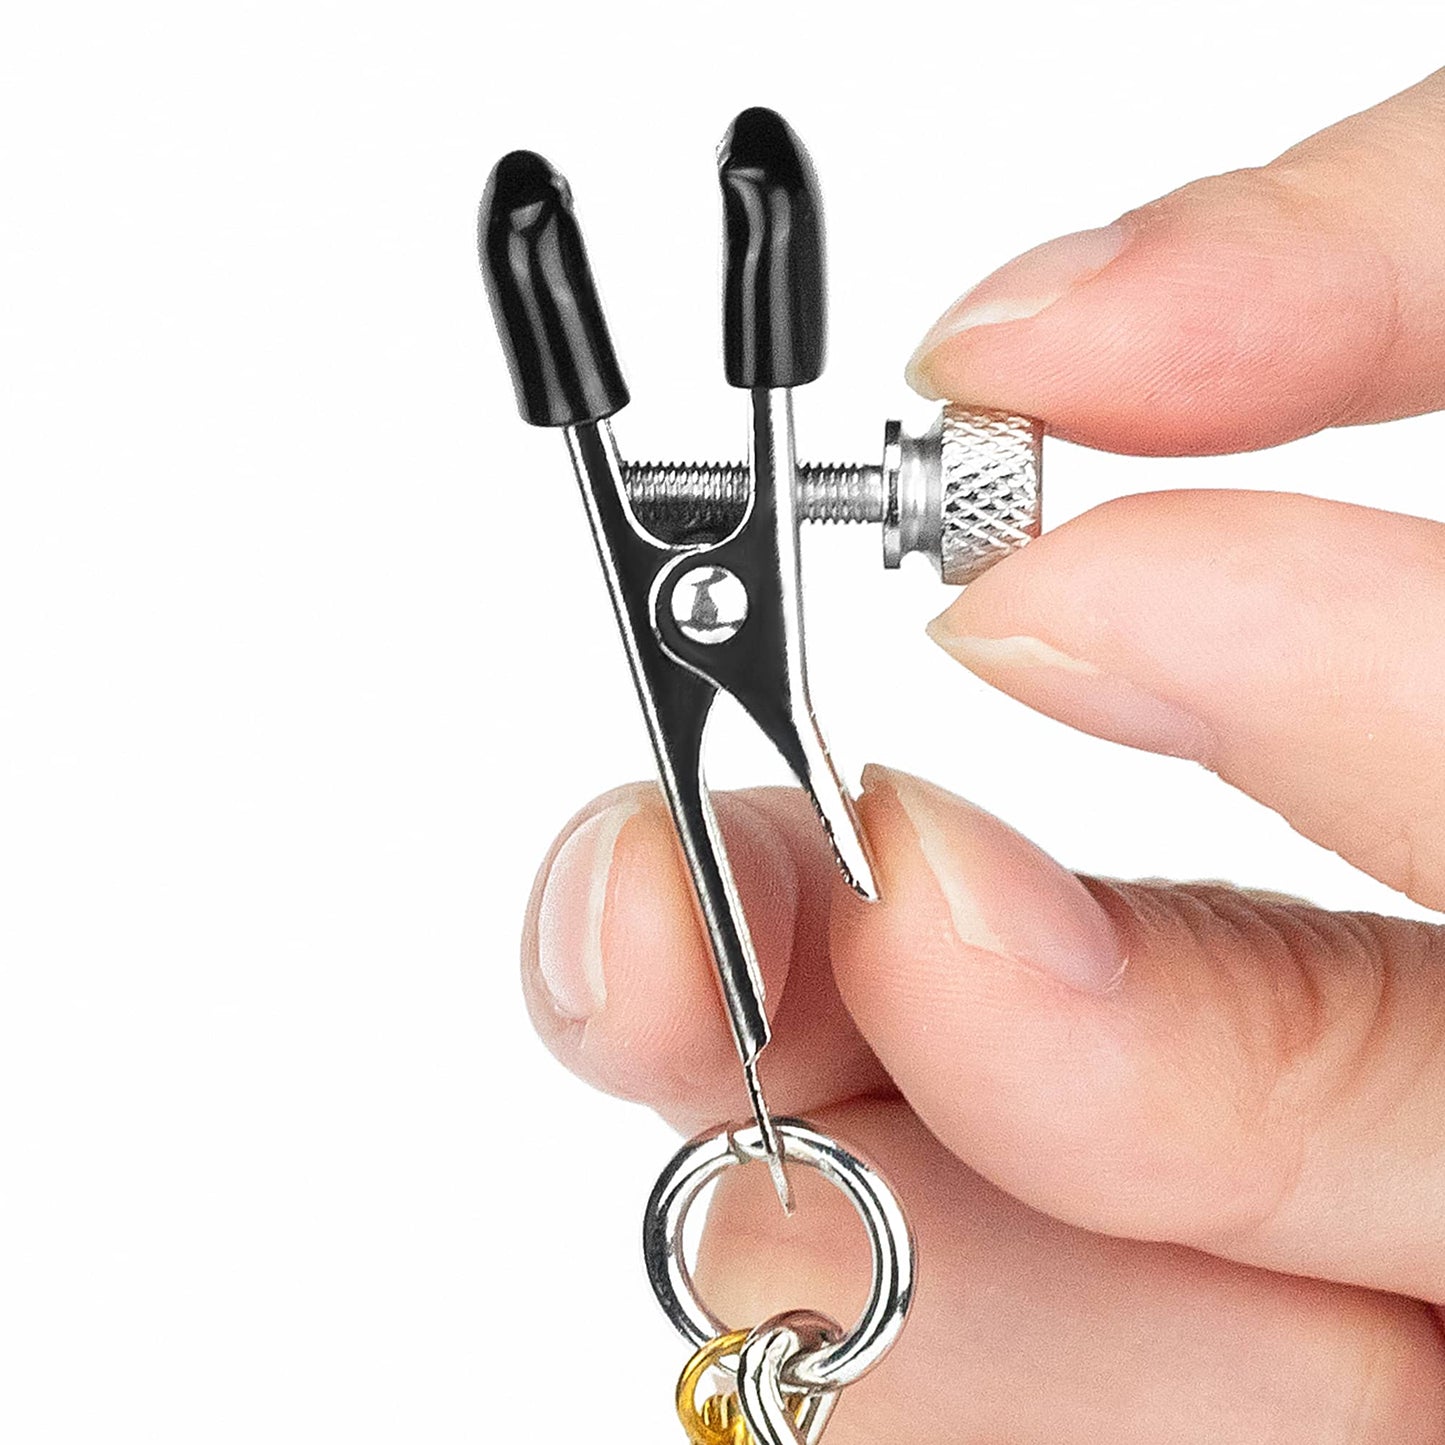 The adjustable crocodile style clamps of the nipple clit tassel clamp with chain